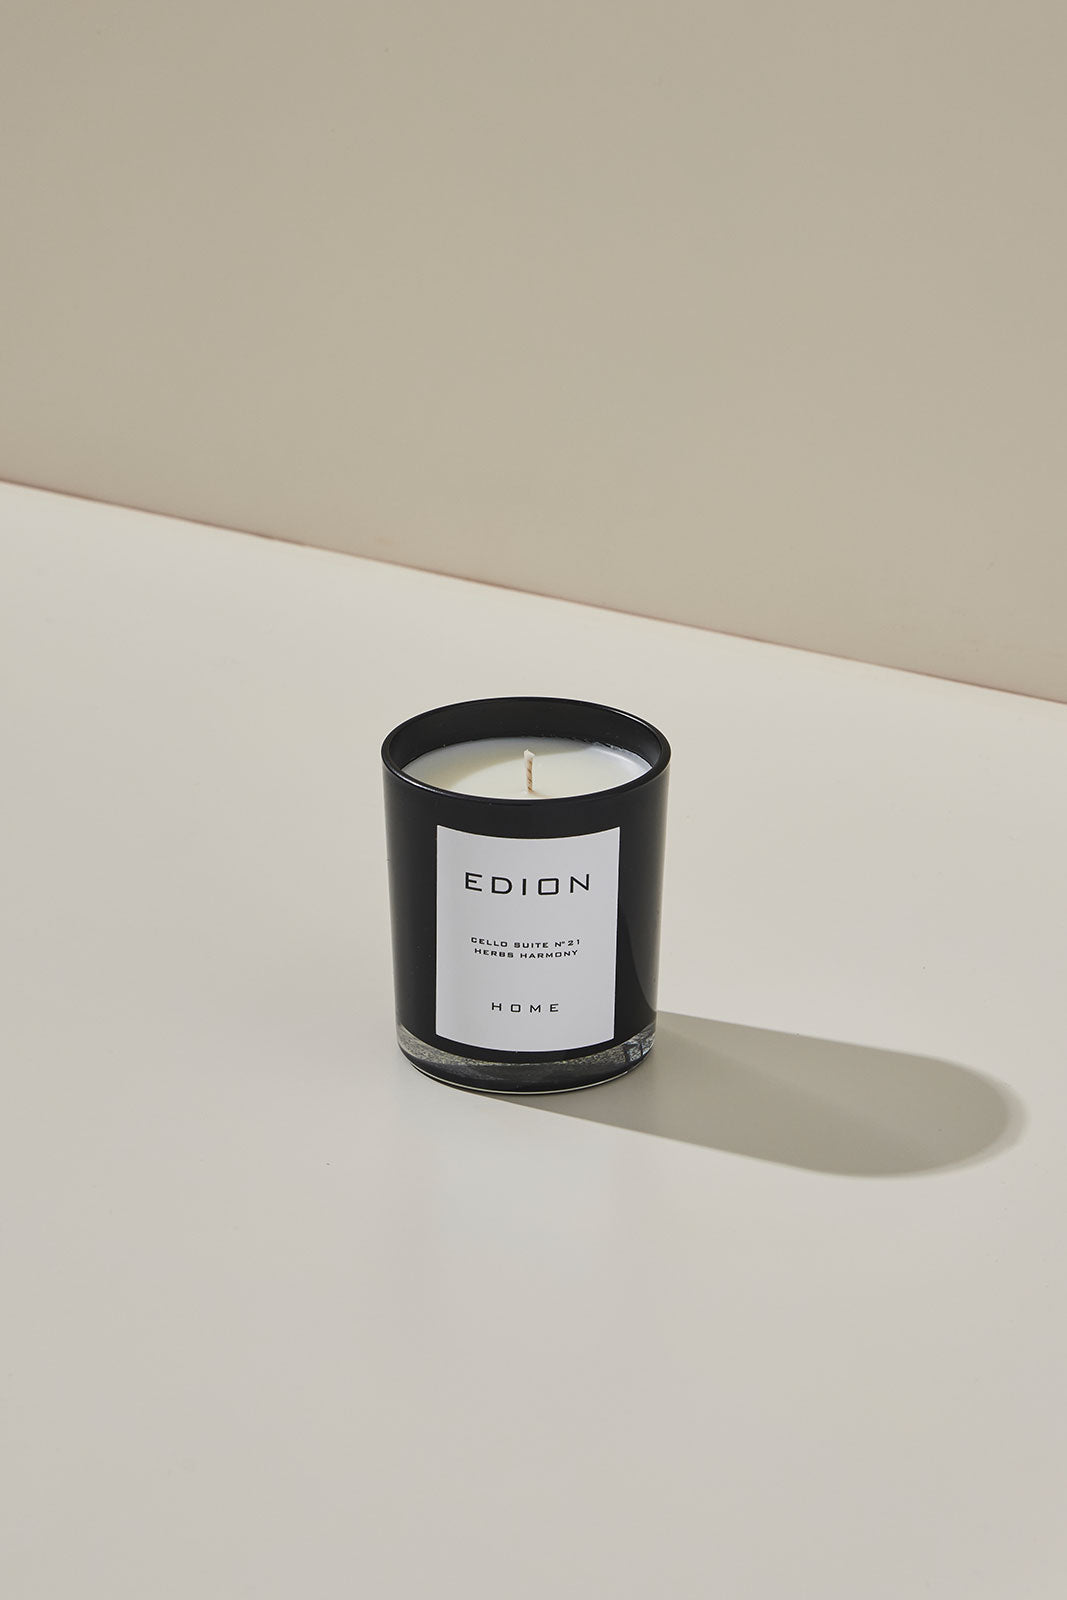 Scented candle Cello suite n. 21 Herbs Harmony